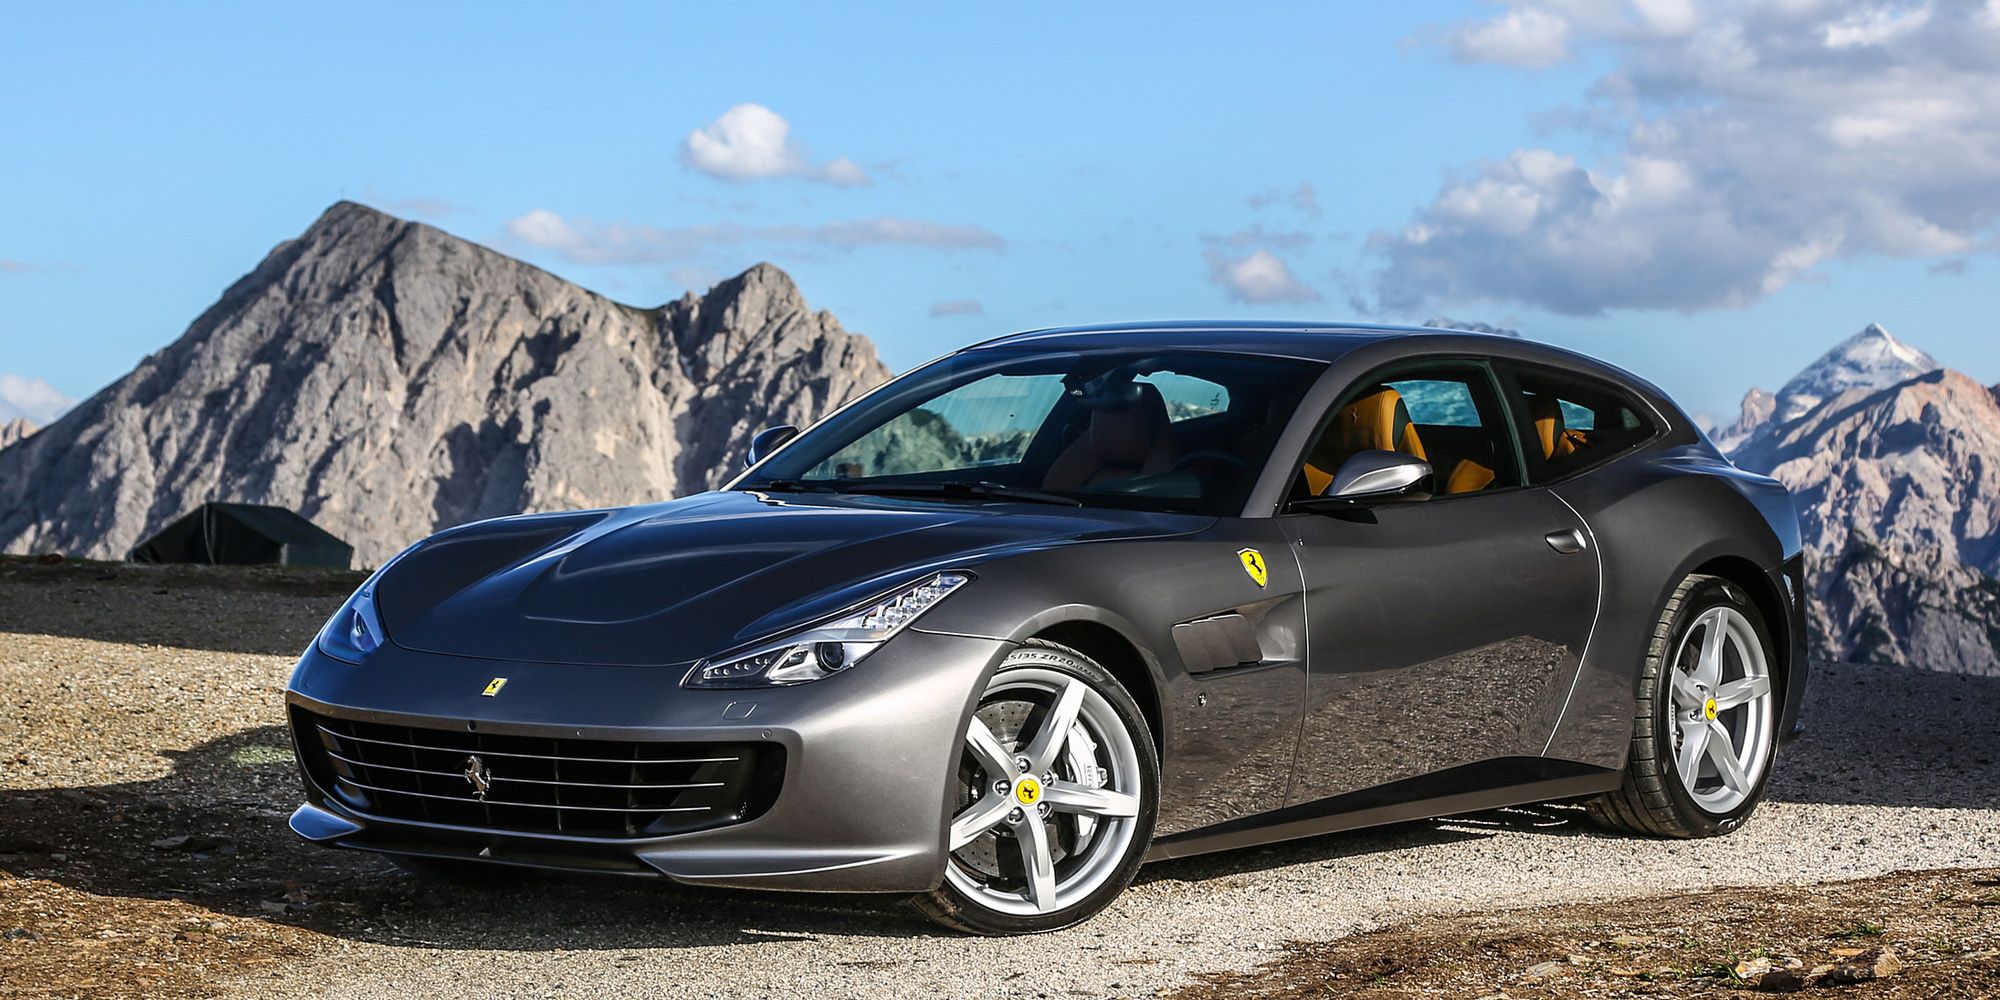 Front 3/4 view of the GTC4Lusso